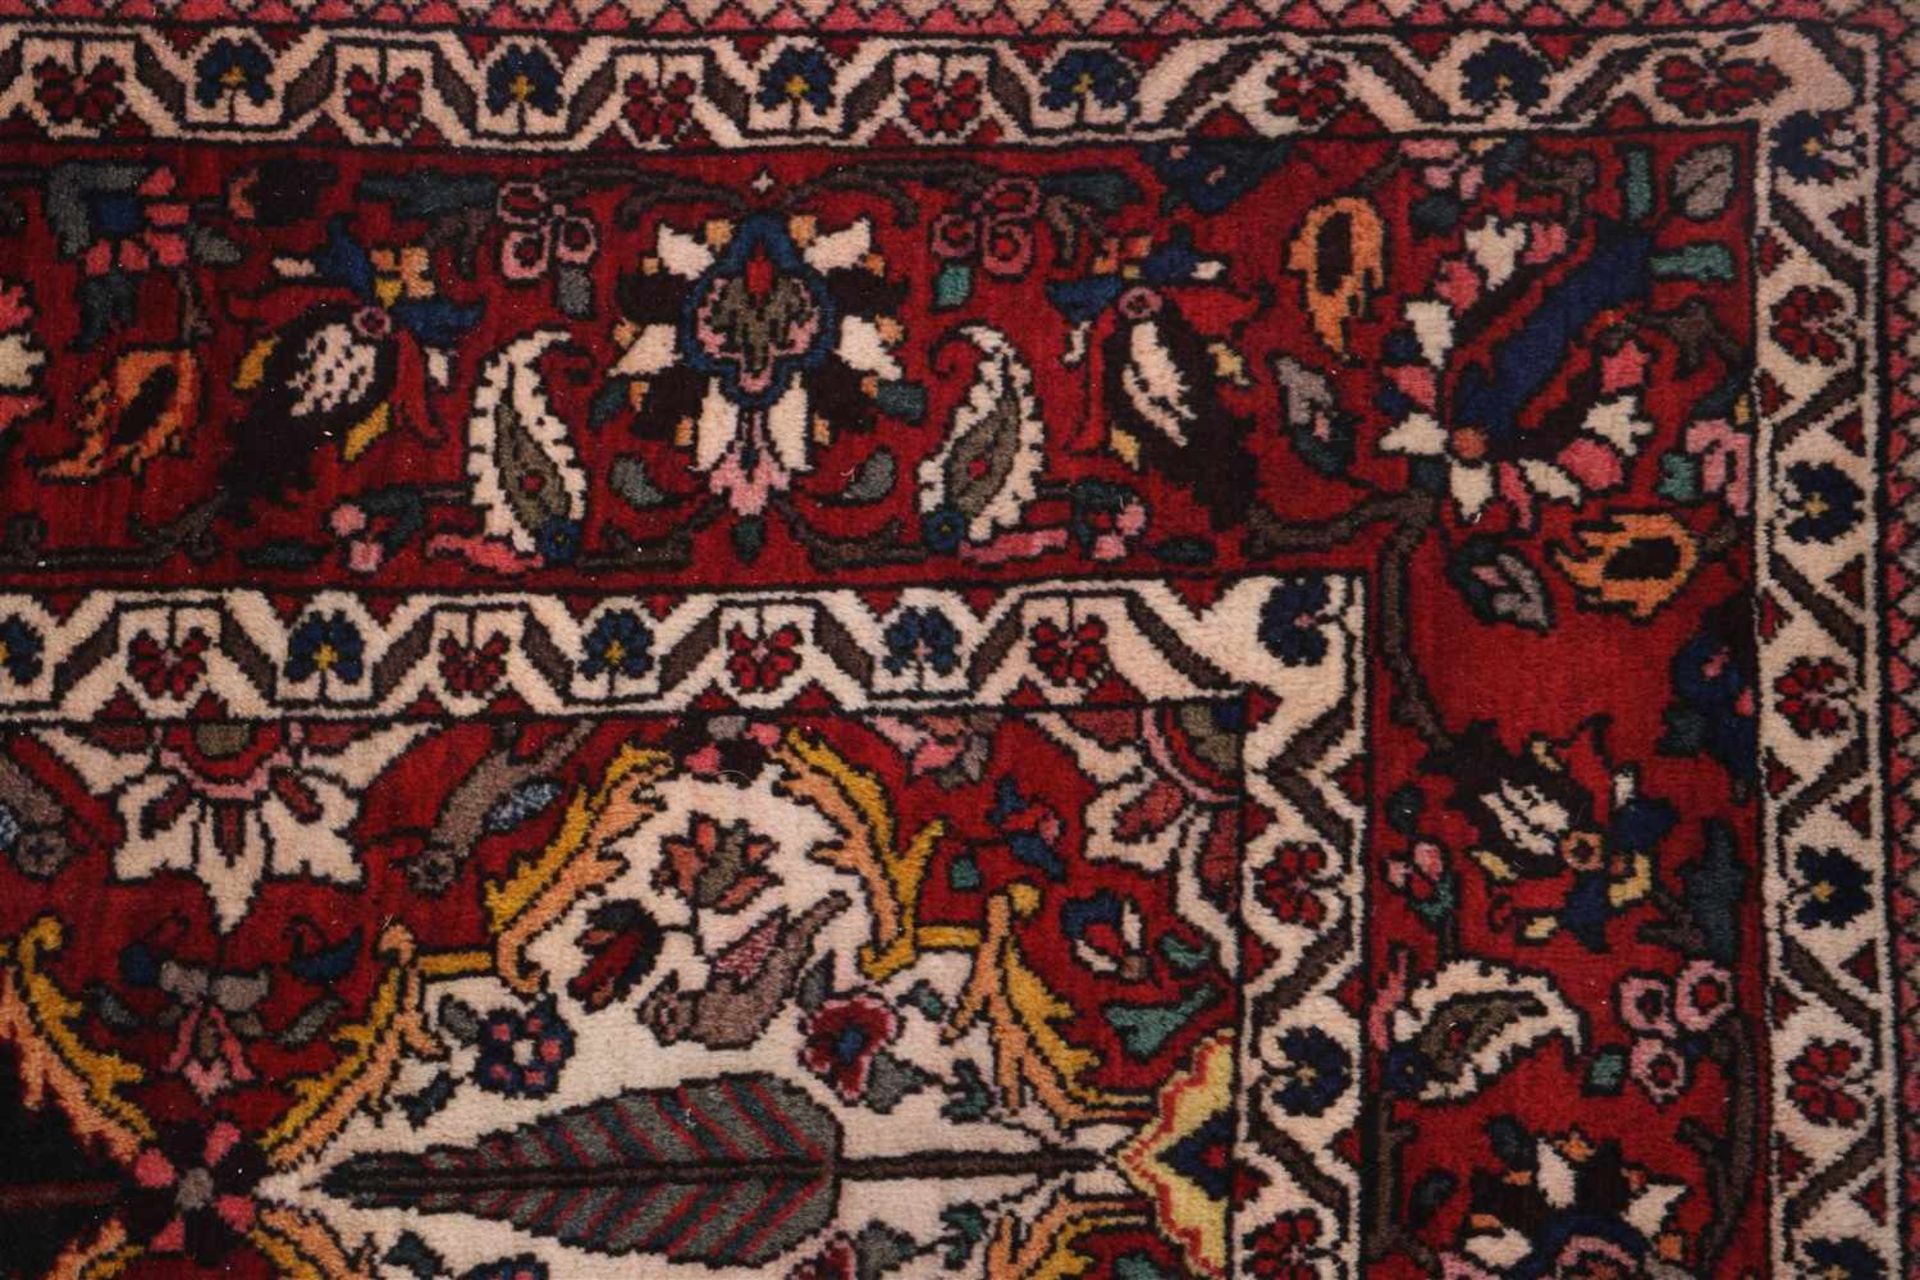 Beautiful Bakhtiar hand-knotted rug 303x208 cm - Image 3 of 4